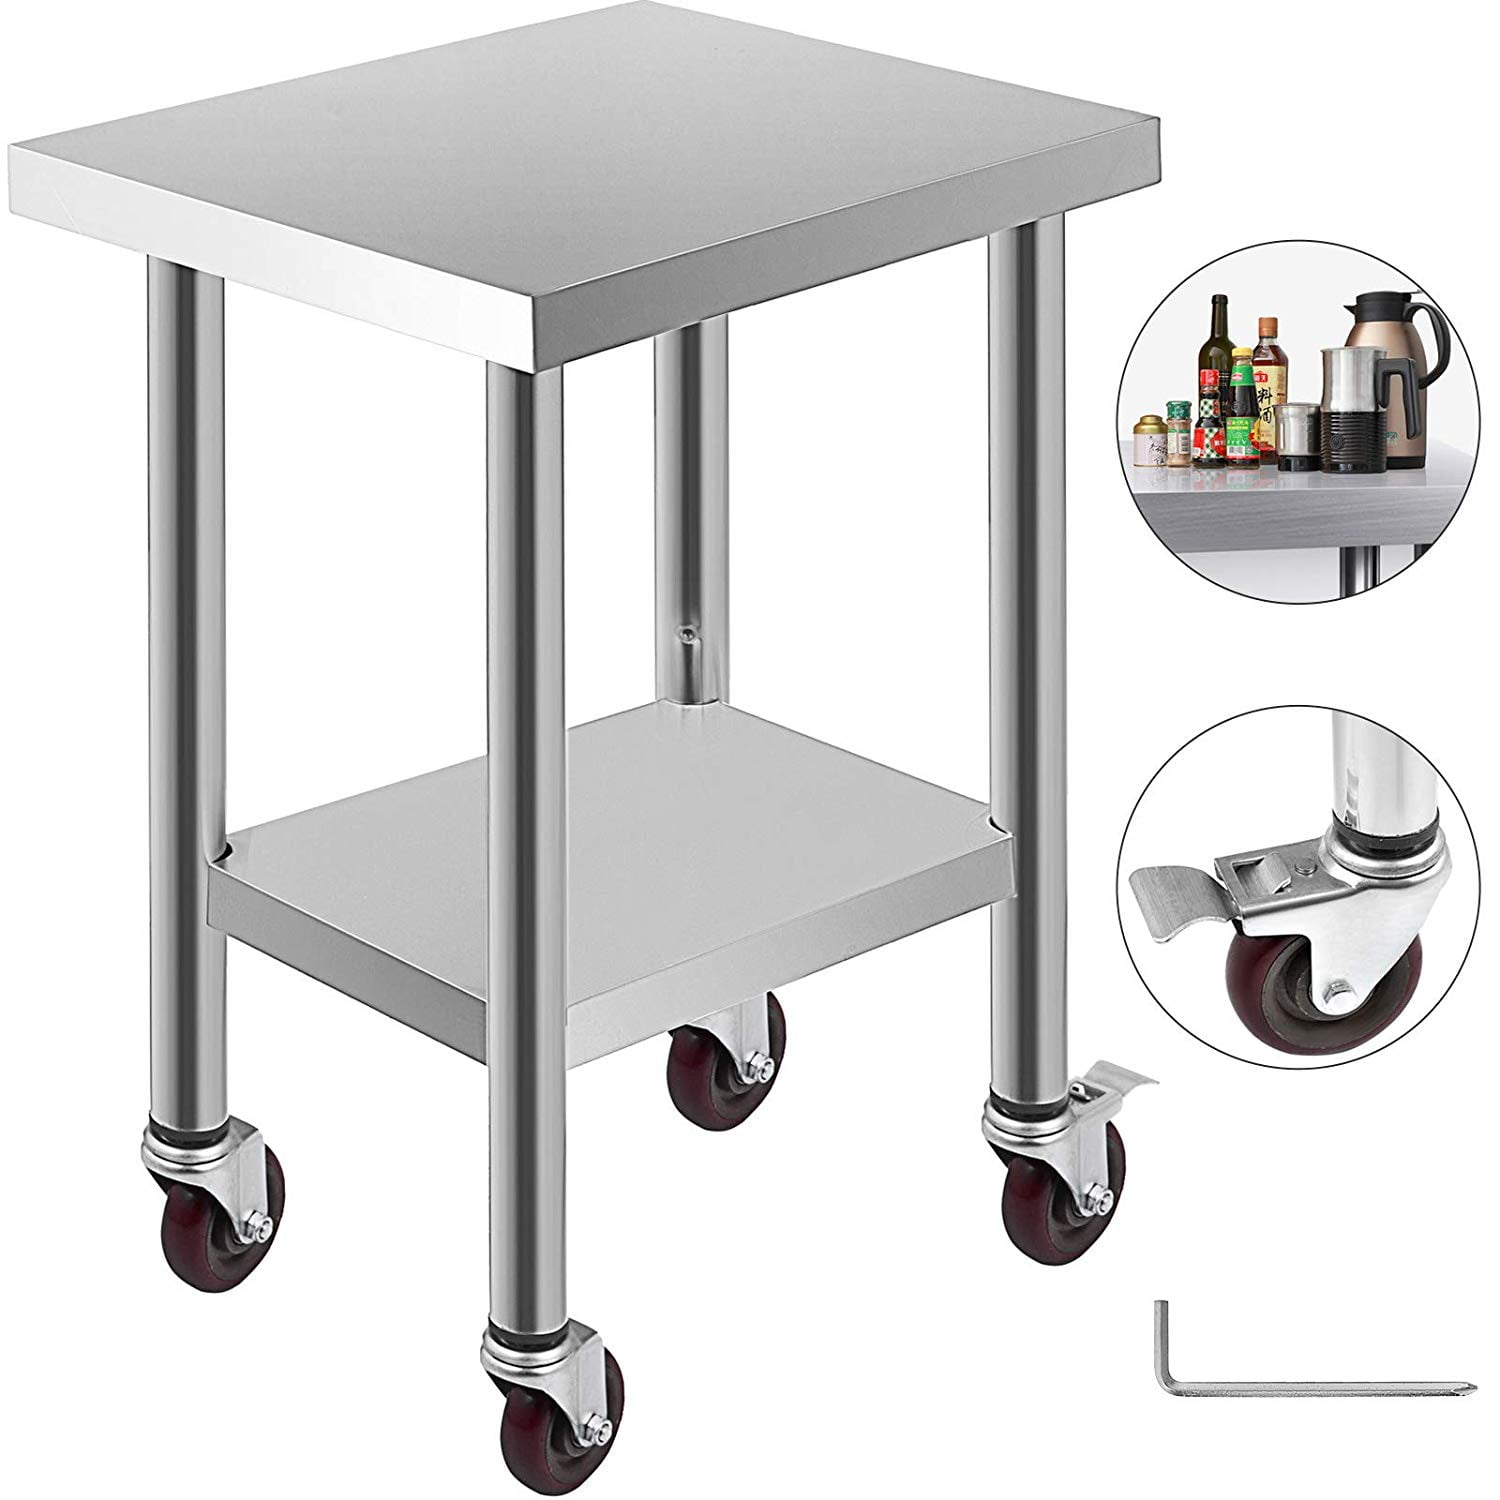 24"x18"Stainless Steel Work Table 3-Stage Adjustable Shelf with 4 Stainless Steel Work Table On Wheels